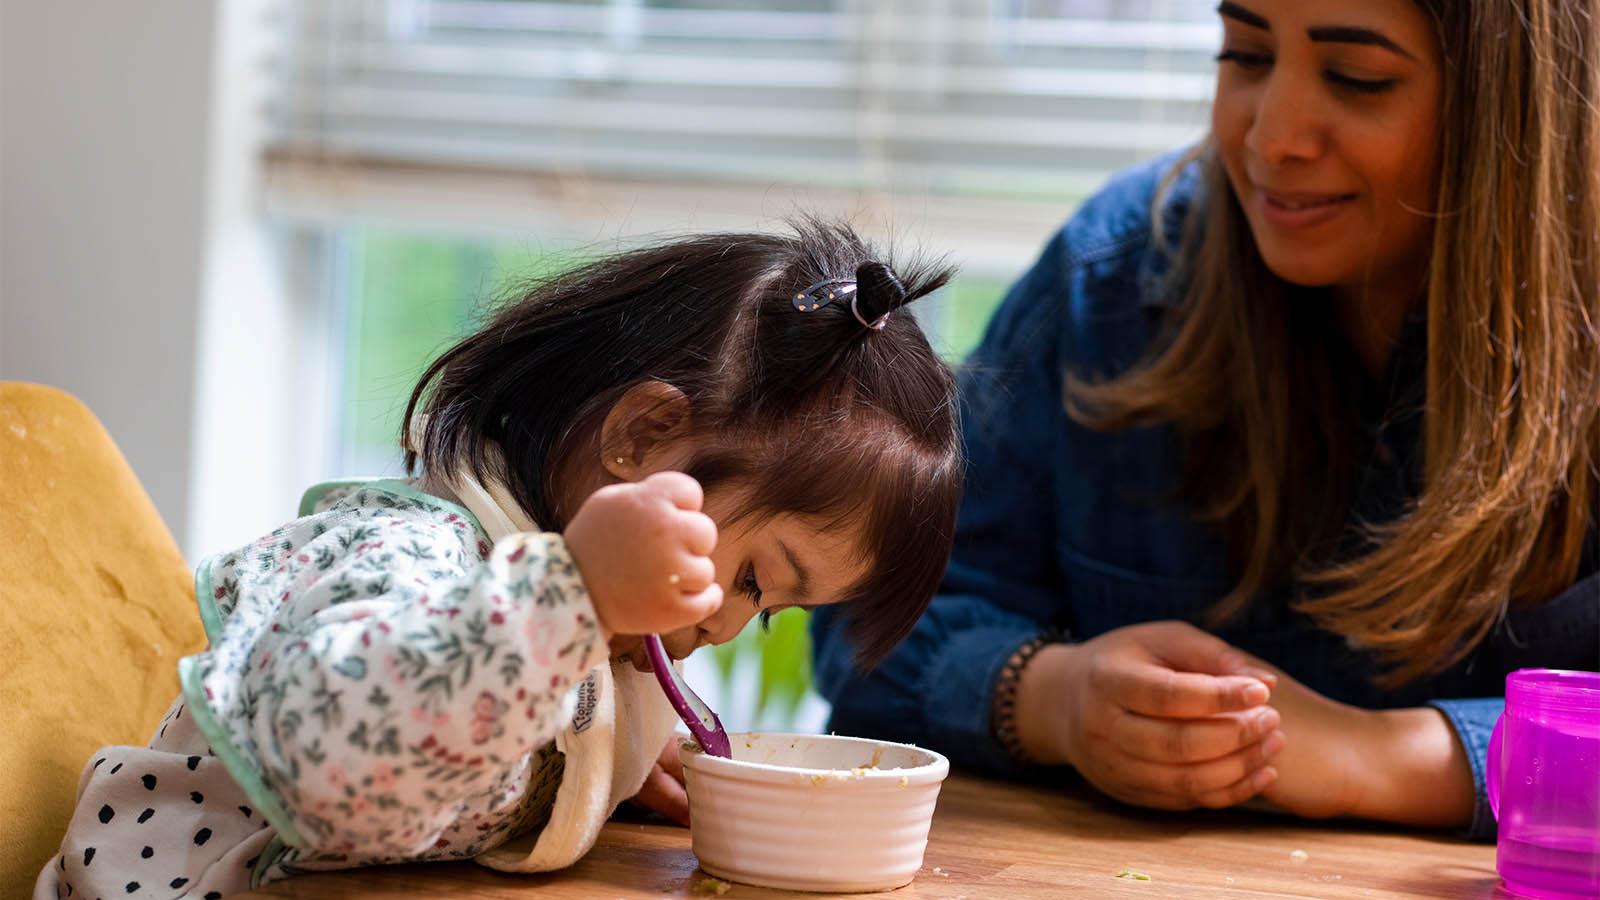 Child with Down syndrome eating with mom looking on